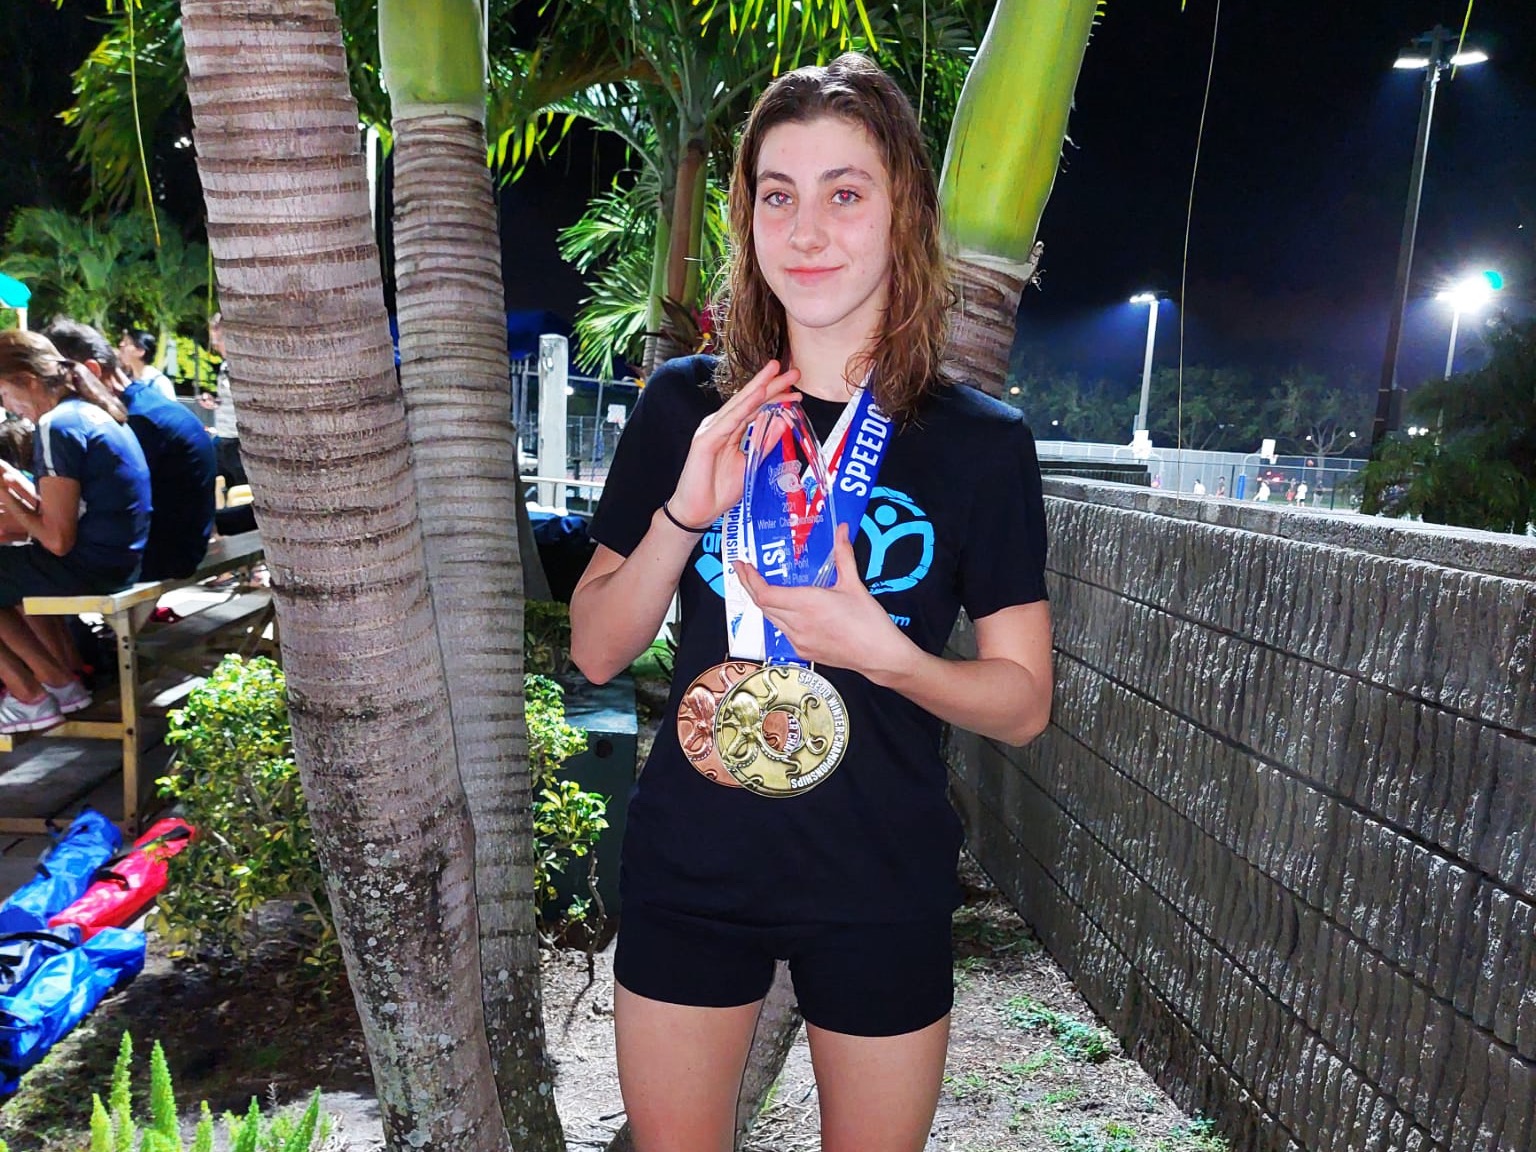 Martyna Kaps shows off her new hardware after finishing 3rd at the 2021 Speedo Championships in Florida